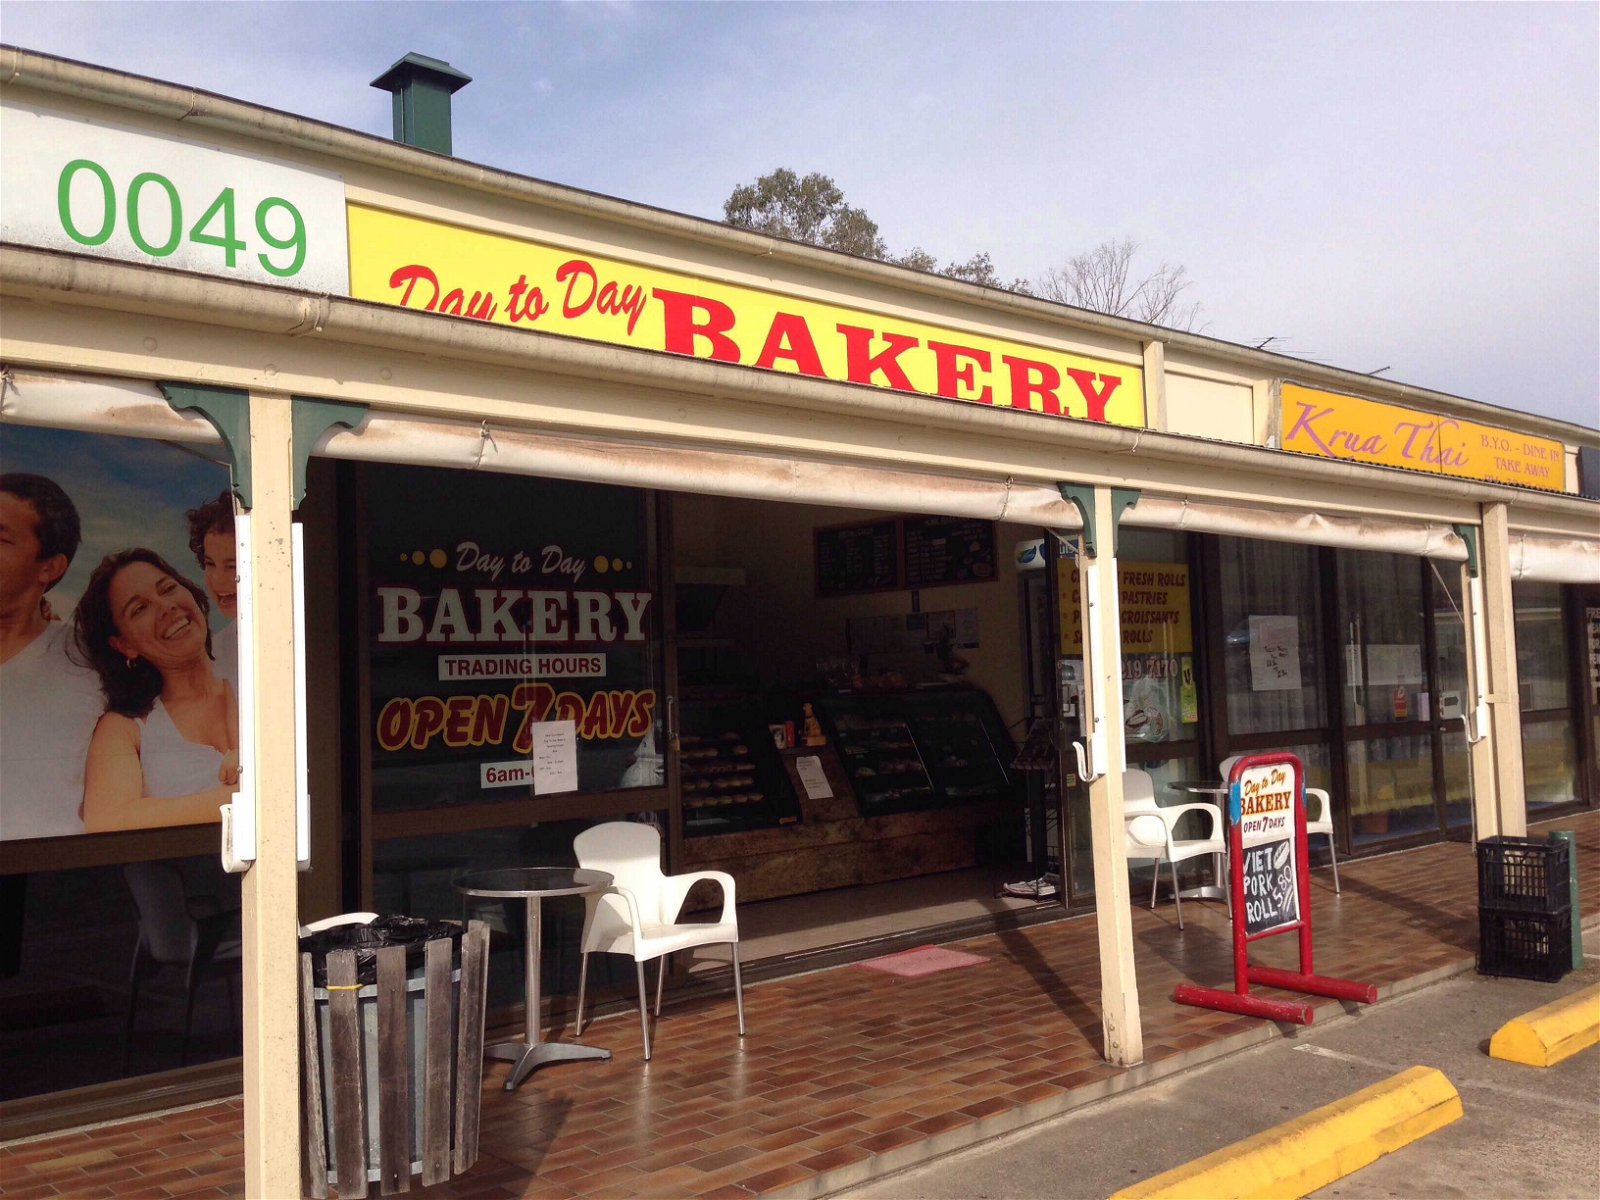 Day To Day Bakery - Pubs Sydney